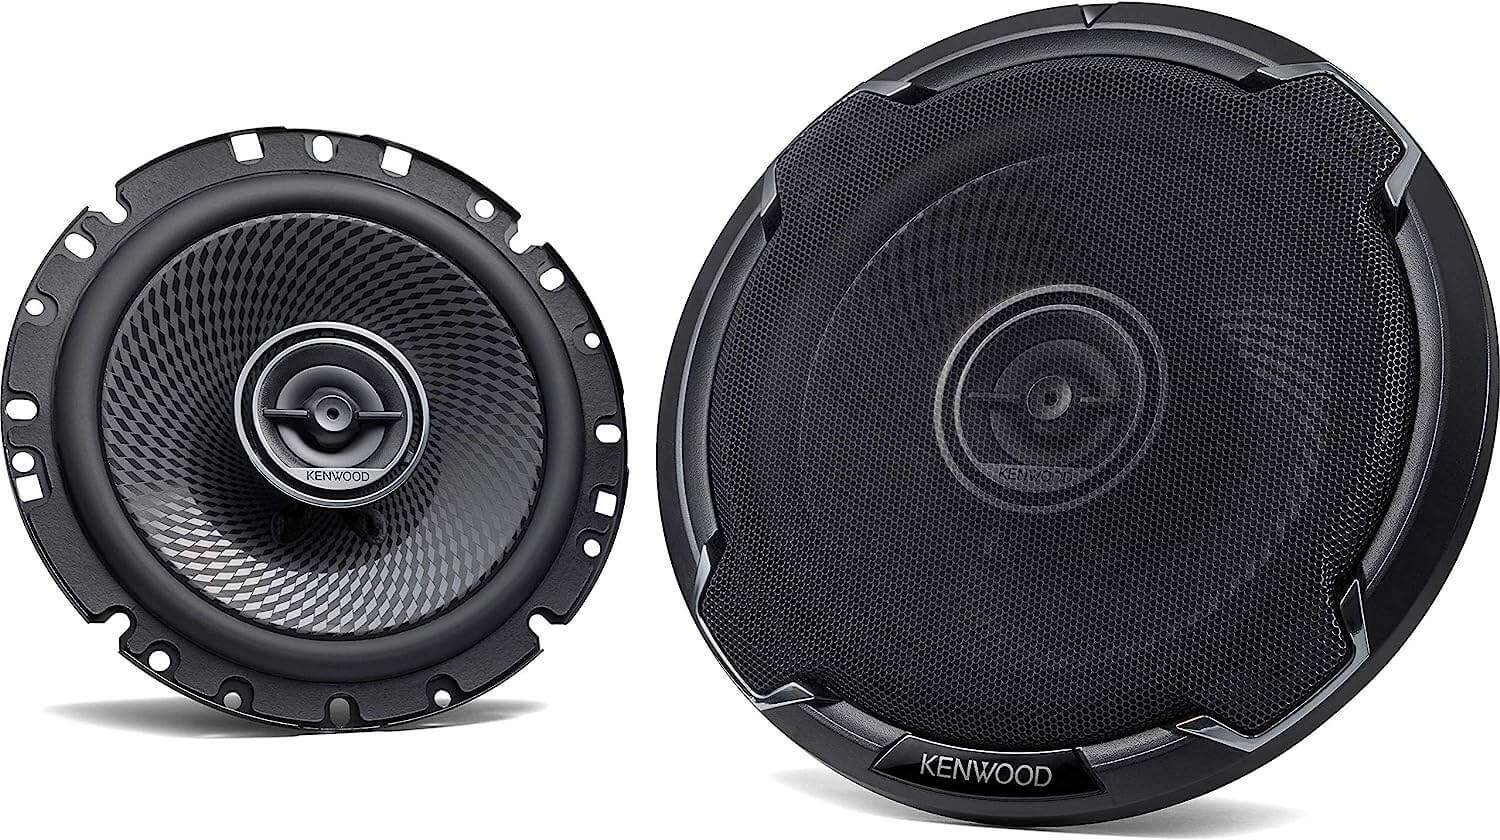 Kenwood KFC-1796PS - Best 6 3/4 speakers with good bass